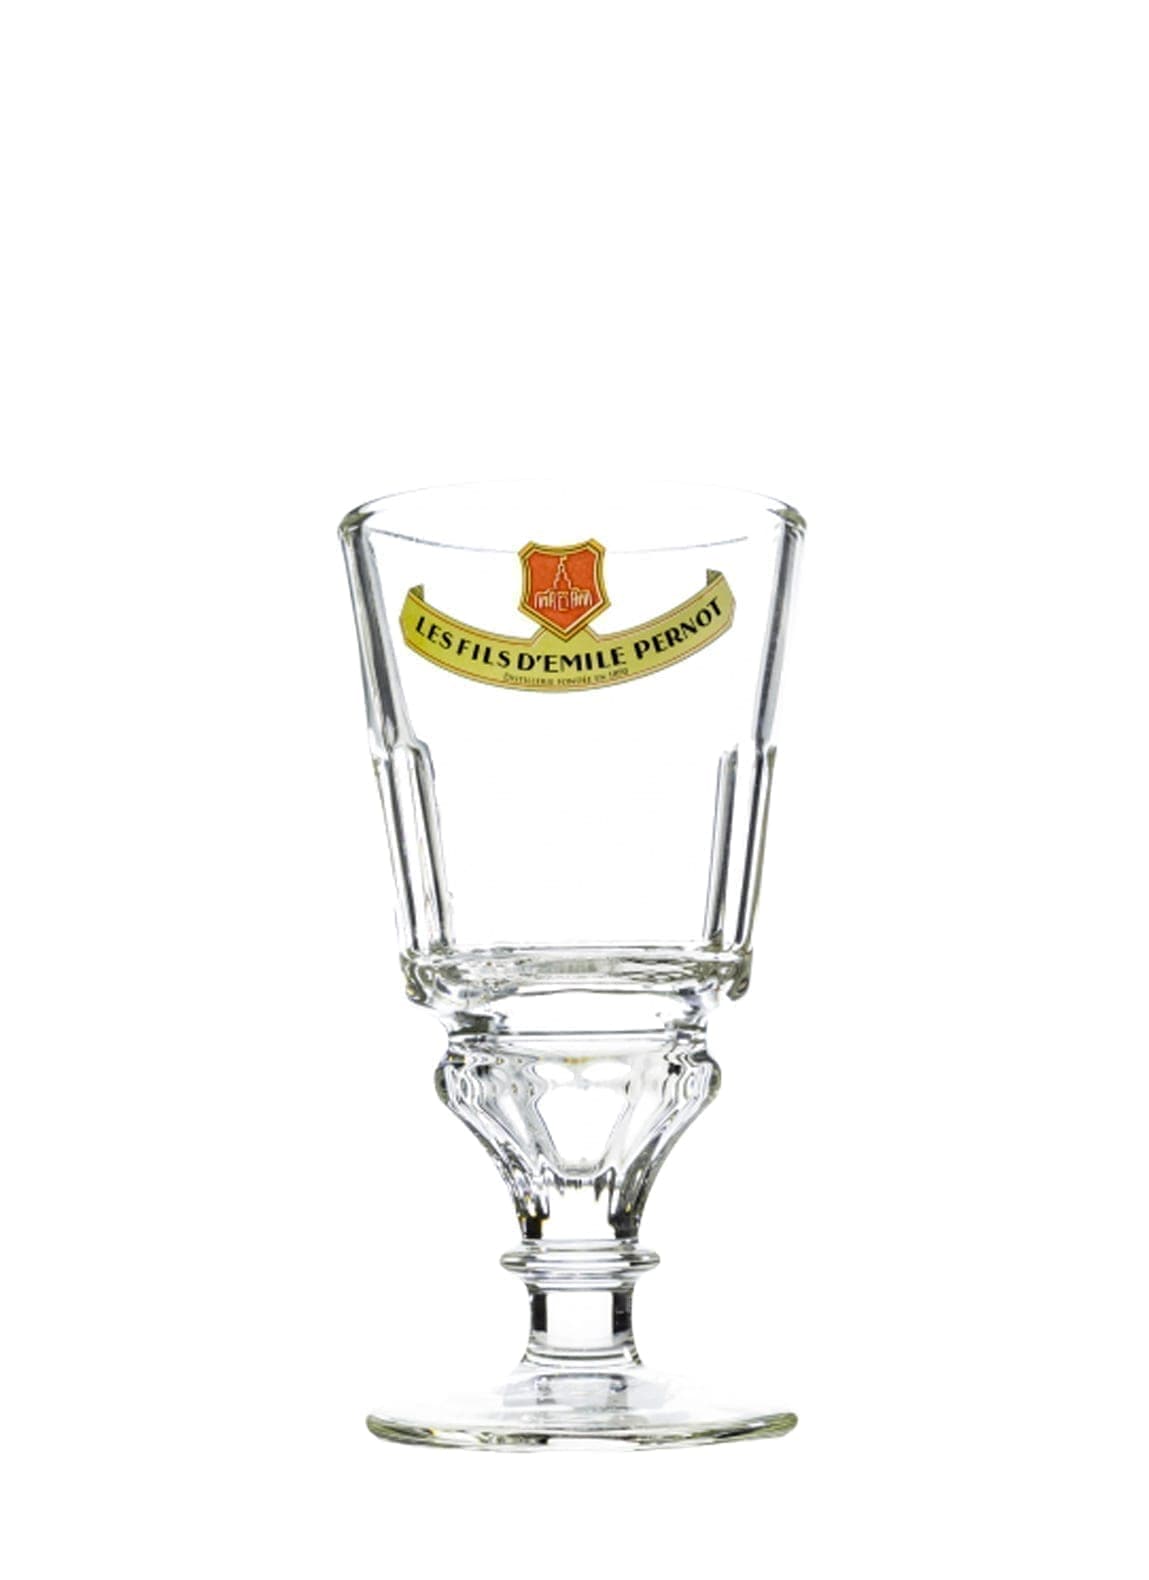 Emile Pernot Absinthe Glass | Glass | Shop online at Spirits of France